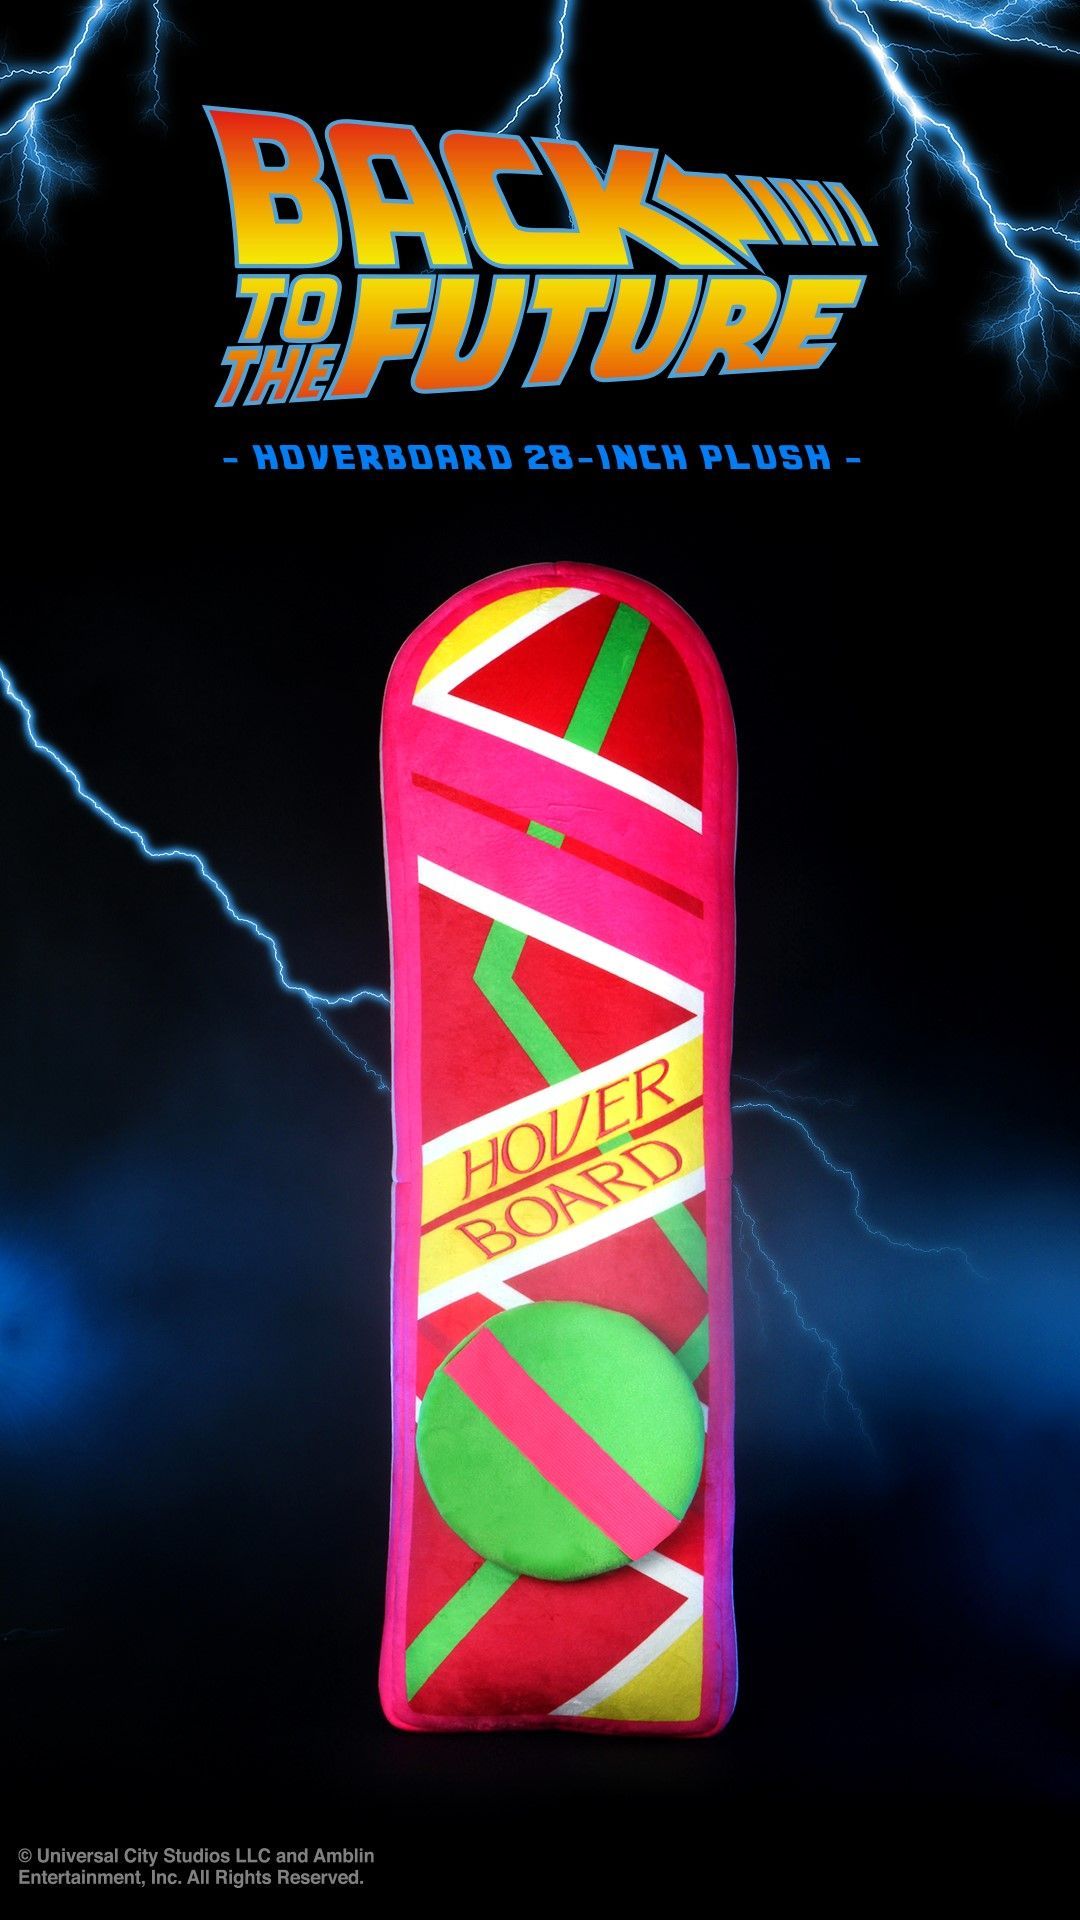 Hoverboard Back to the Future II w pluszowej formie